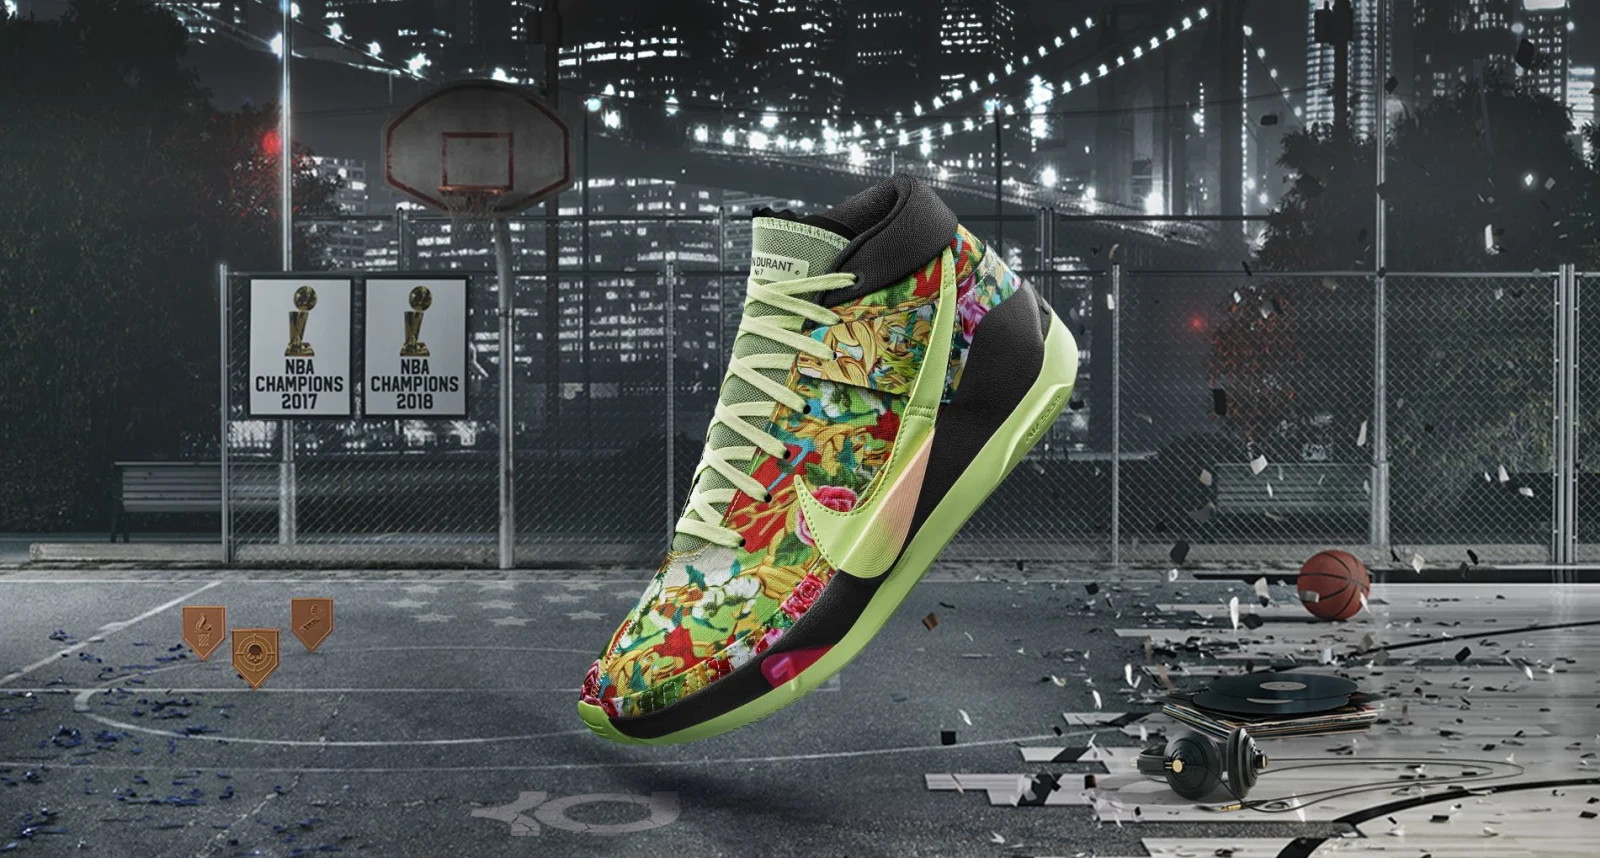 Nike KD 13 “Funk” Is The Latest NBA 2K20 Exclusive: Photos